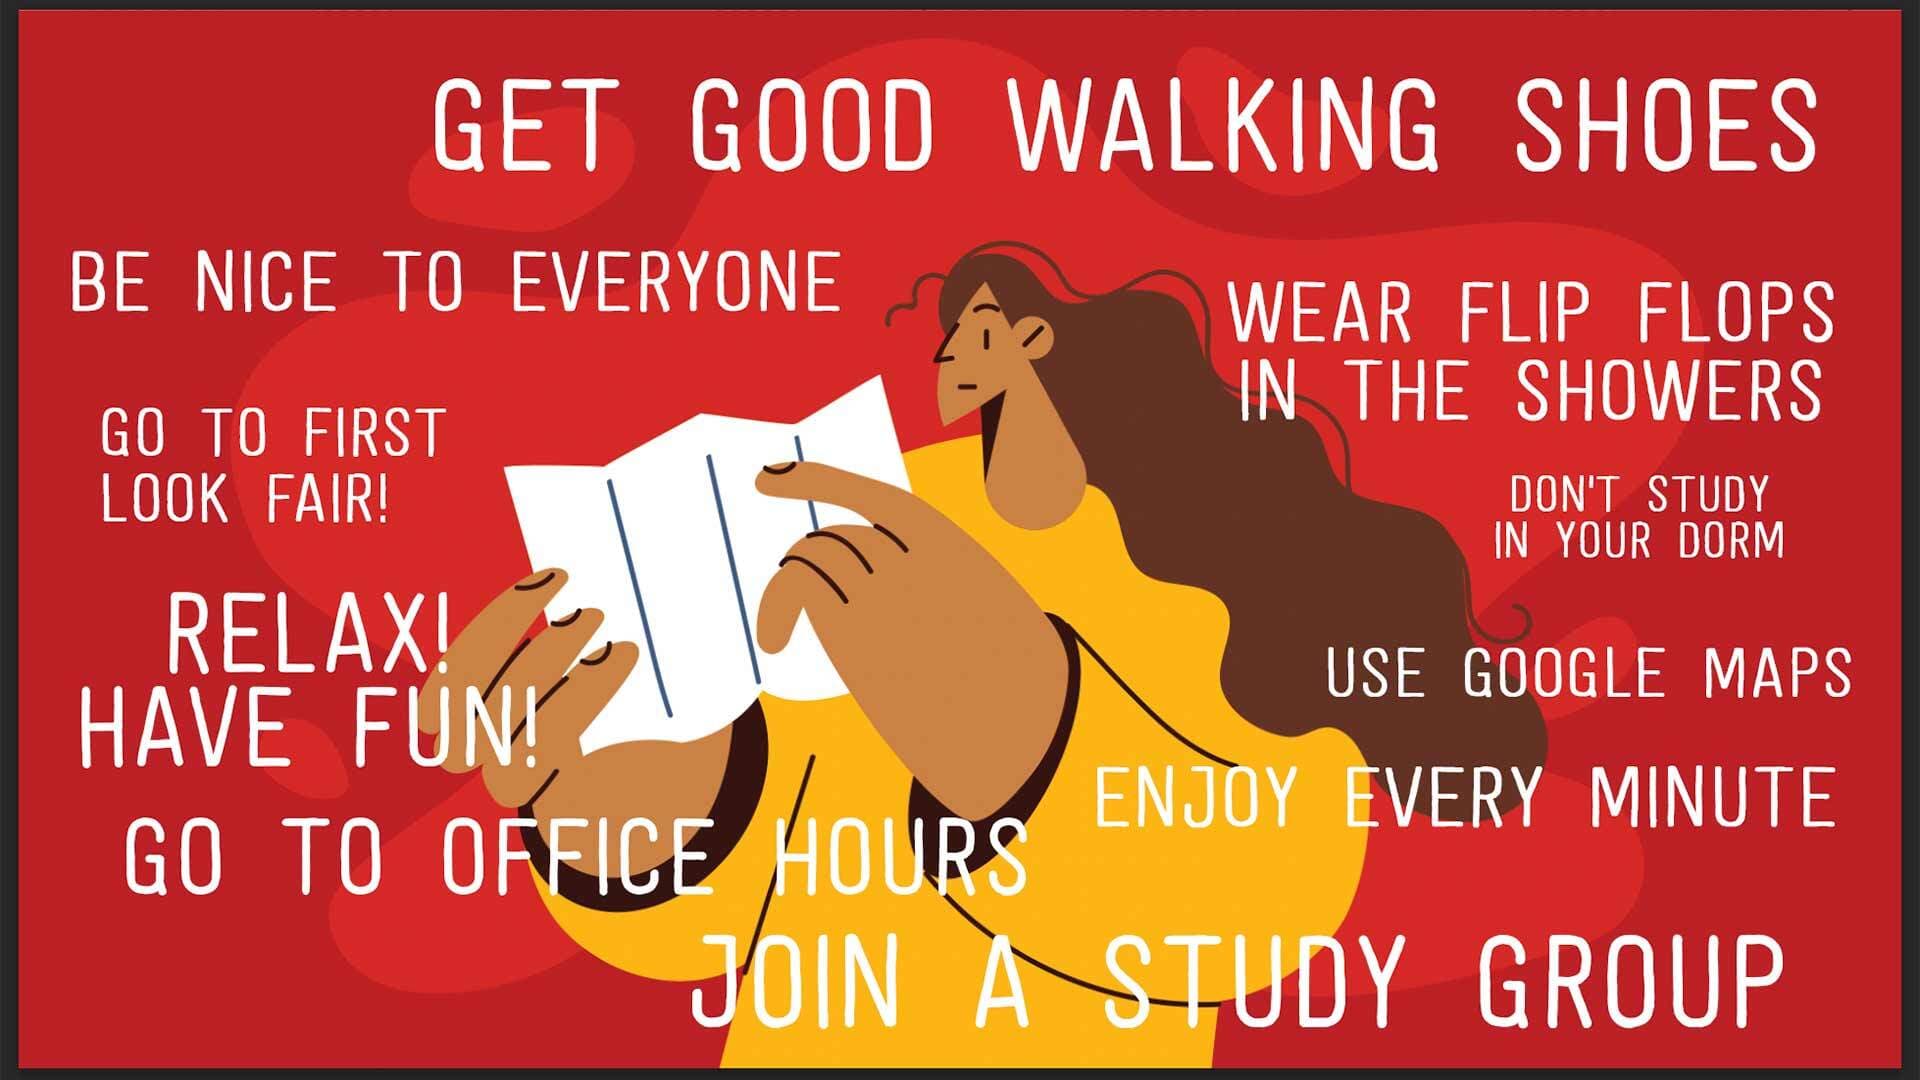 person reading paper with advice messages surrounding her: Get good walking shoes. Be nice to everyone. Wear flip flops in the showers. Go to First Look Fair! Relax! Have fun! Don't study in your dorm. Use Google Maps. Go to office hours. Join a study group